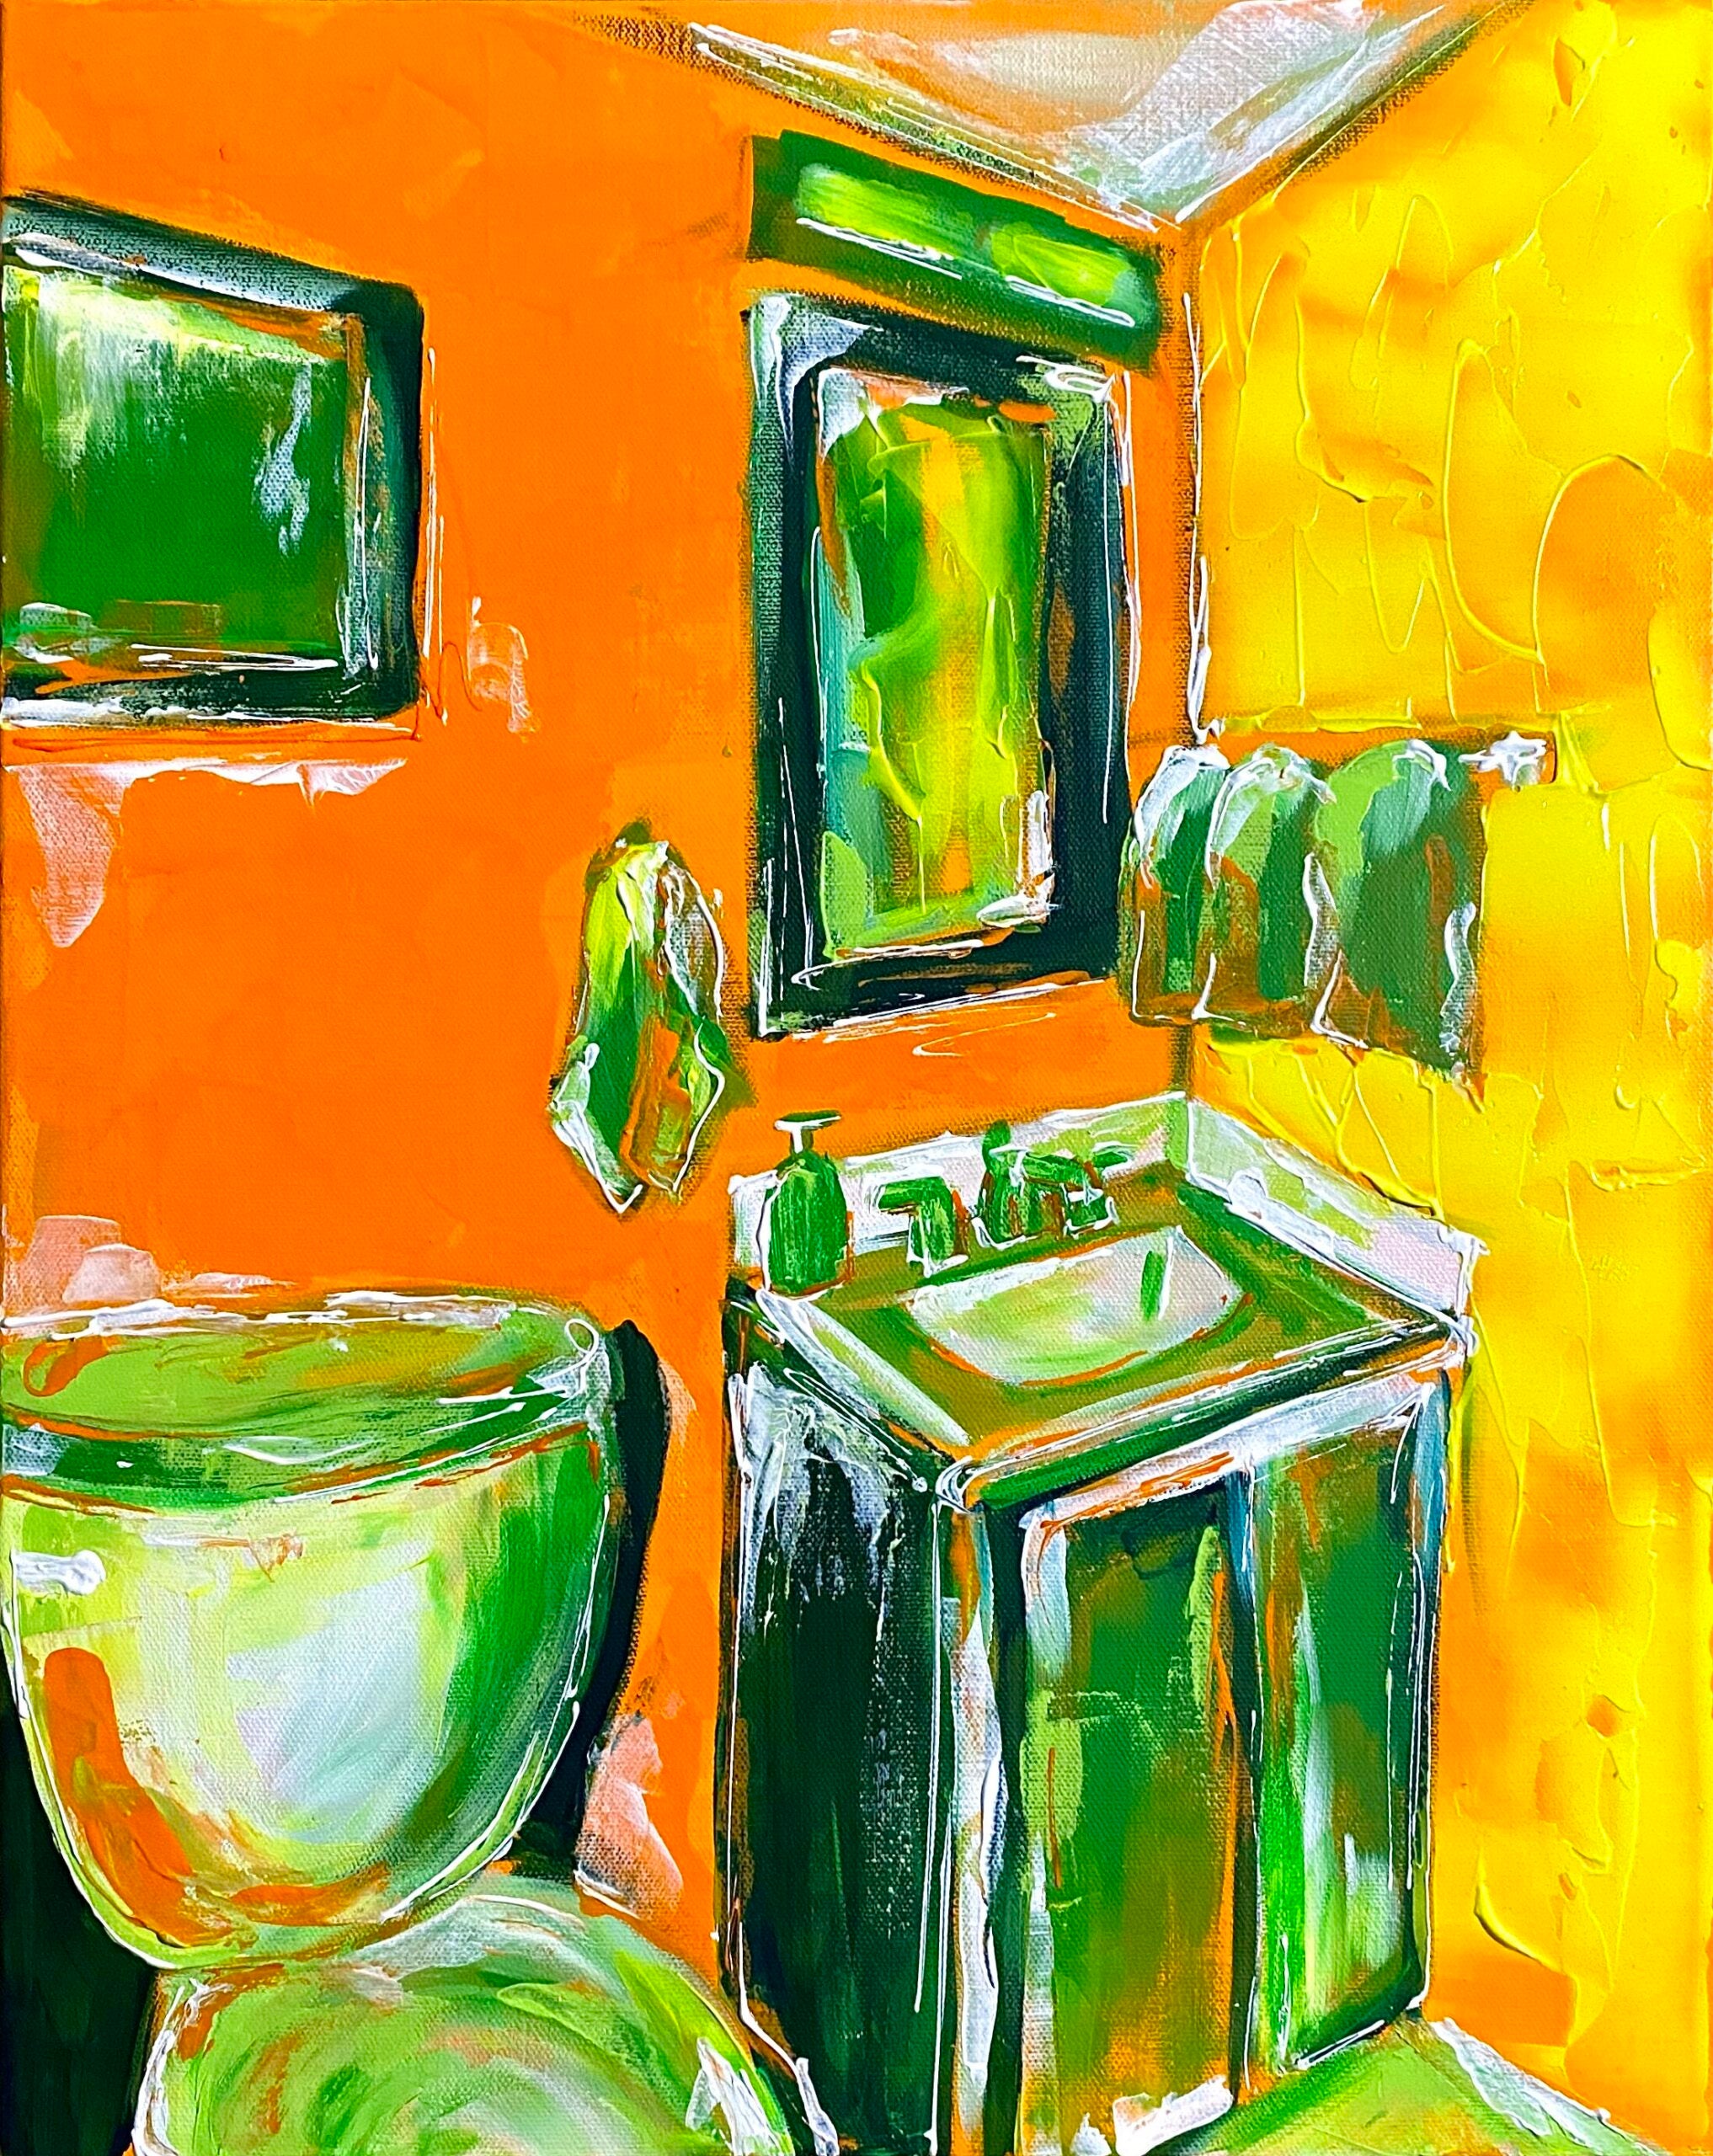 Illustration of a bathroom. It uses green, yellow, and orange colors.